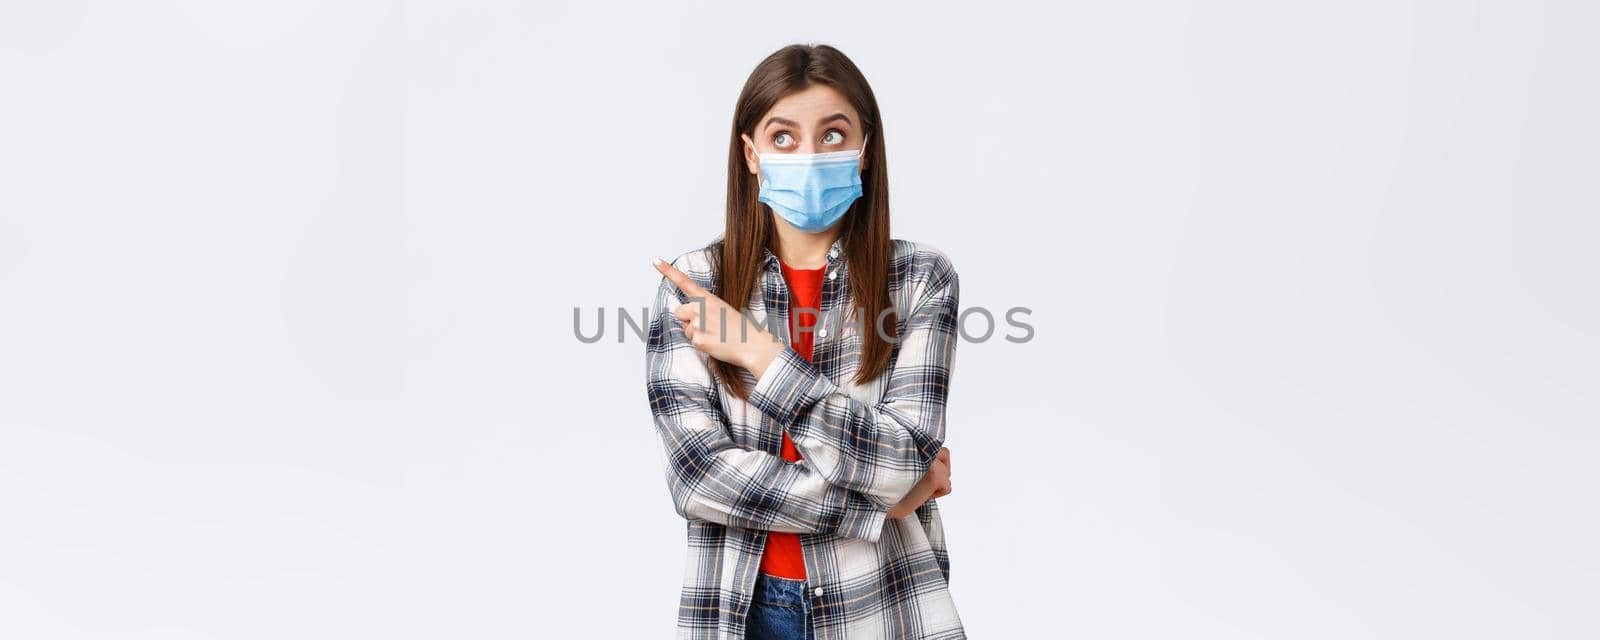 Coronavirus outbreak, leisure on quarantine, social distancing and emotions concept. Intrigued and surprised attractive girl in medical mask, casual clothes, pointing upper left corner interested by Benzoix